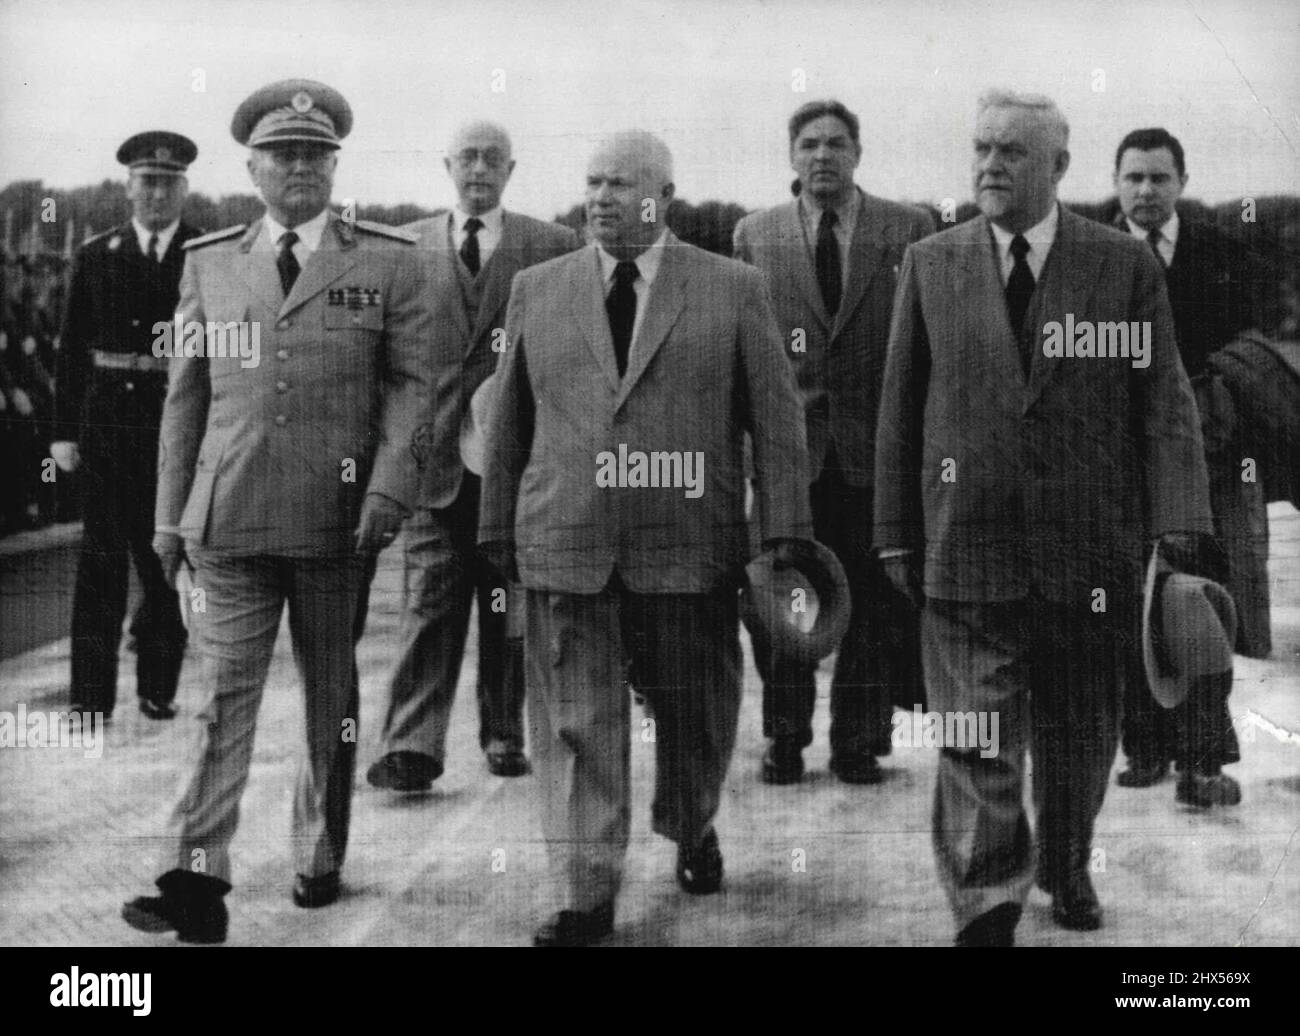 All In Step -- Every Body's in step as Marshal Tito of Yugoslavia, left, Marches with his soviet guests across Tarnac at Belgrade Airport after they hall arrived on a friendship visit to Yugoslavia today, May 26. Nikita Khrushchev, secretary of the Russian visiting delegation at right is the Soviet Prime Minister, Marshal Nikolai Bulganin. At right in the second row is Andrei Gromyko, Deputy Foreign Minister. May 26, 1955. (Photo by Associated Press Photo). Stock Photo